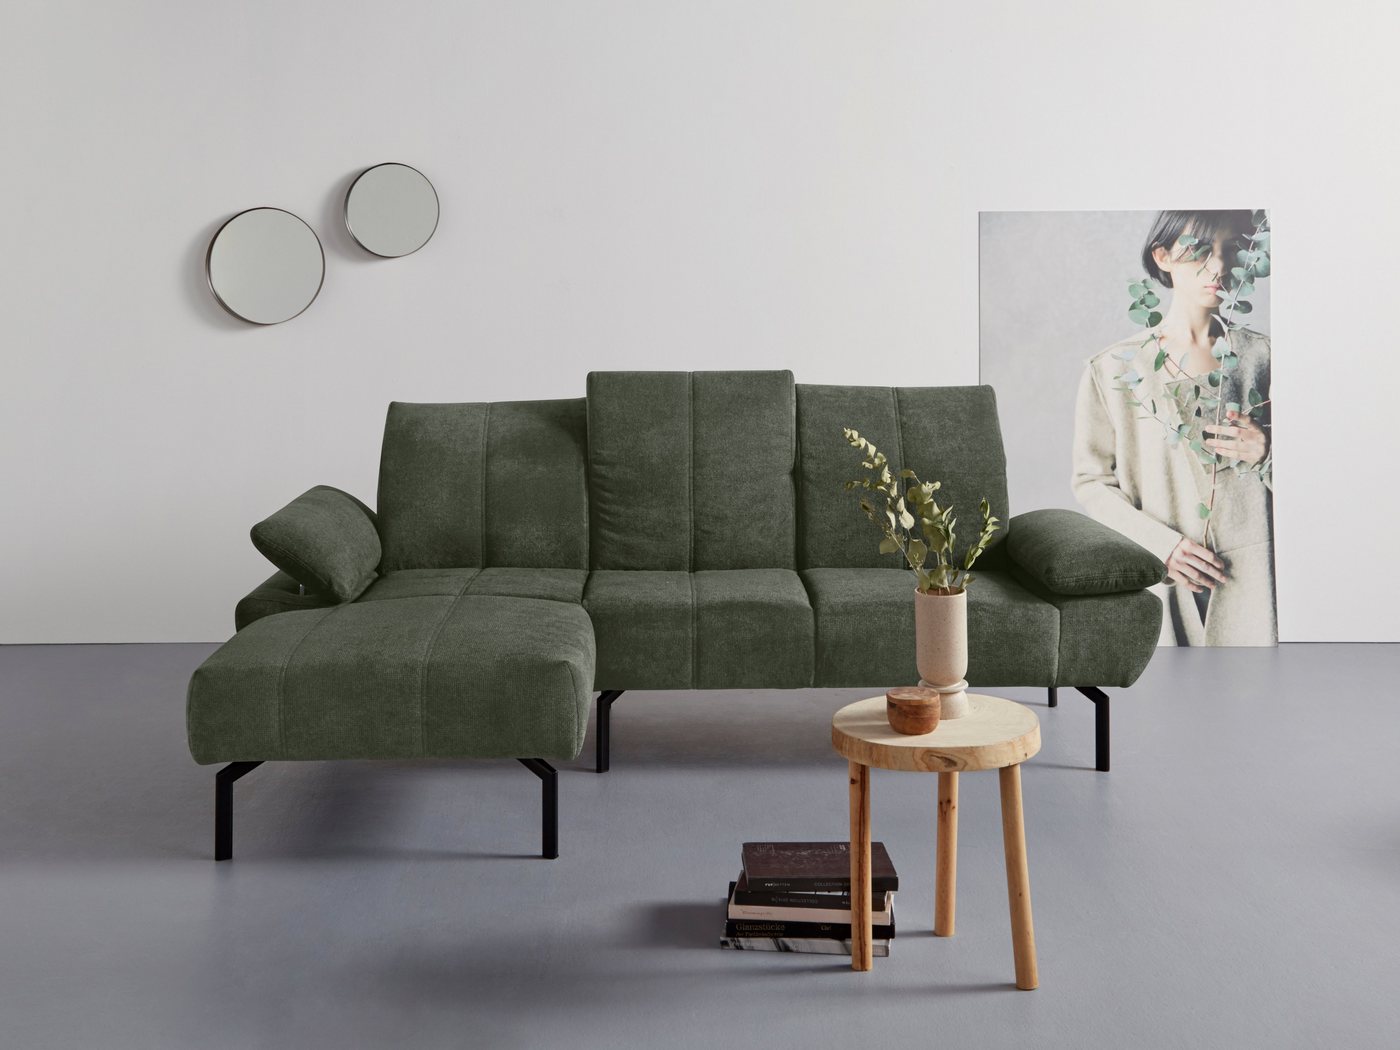 Places of Style Ecksofa Ryedal L-Form, wahlweise mit oder ohne Sockel in Wildeiche-Optik von Places of Style